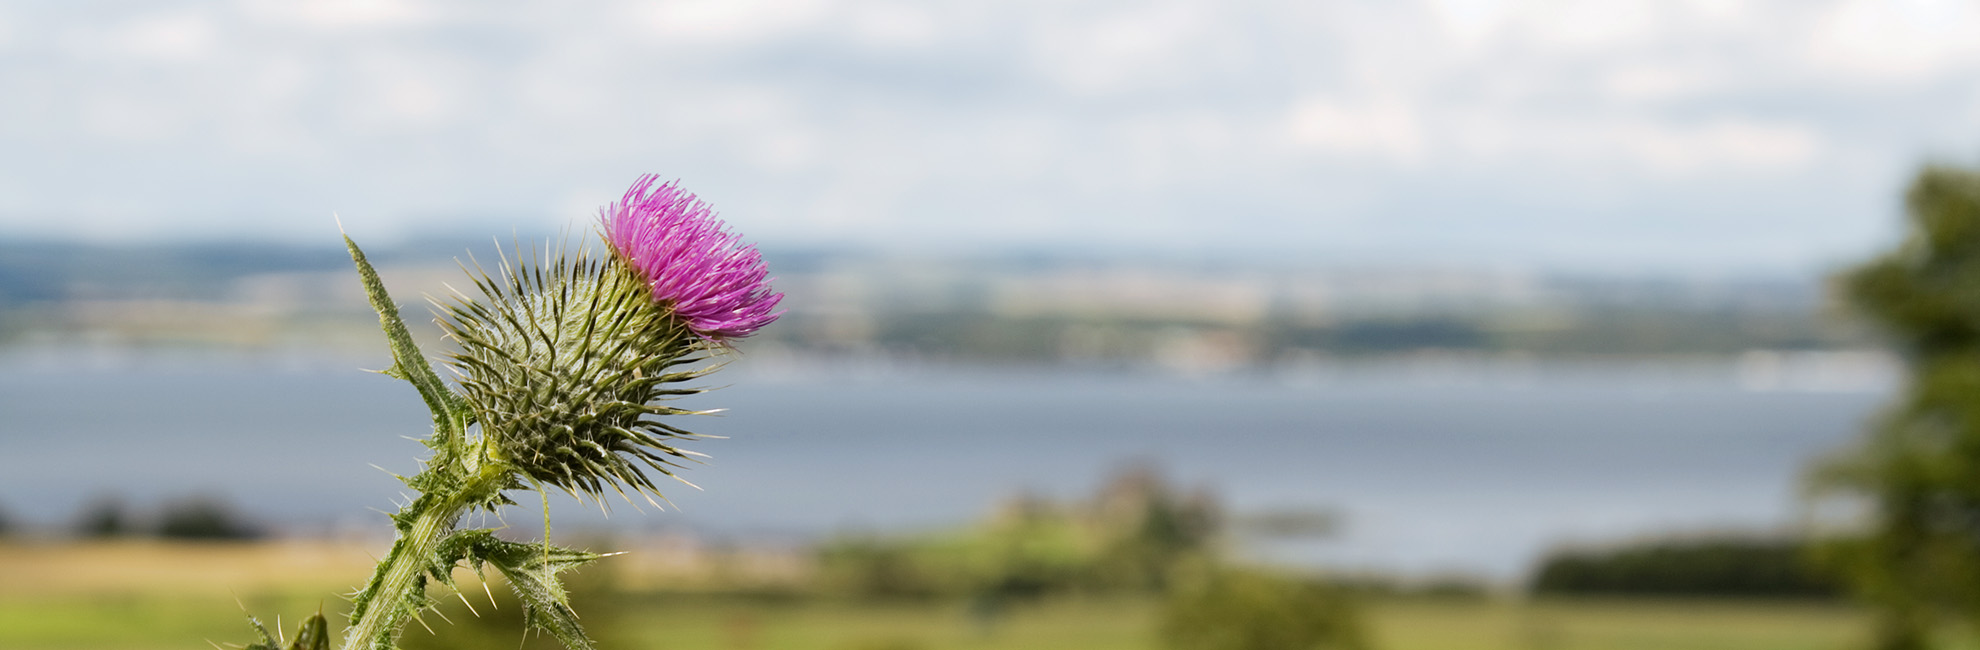 A pink thistle flower growing near the beach in Scotland